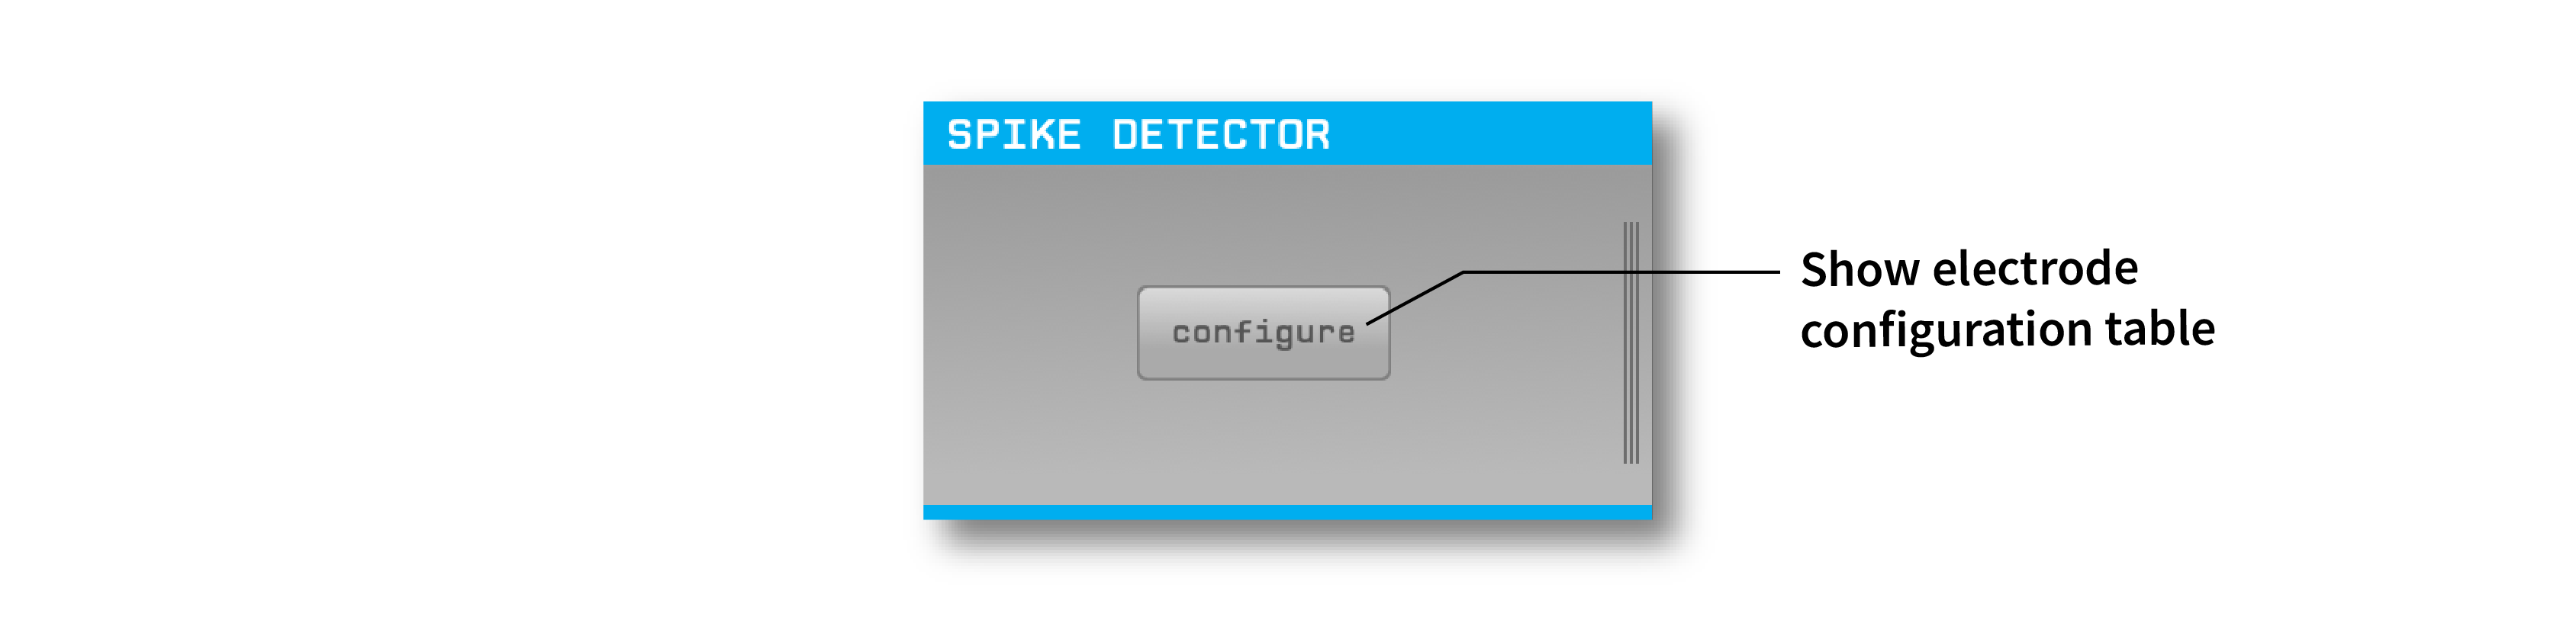 Annotated Spike Detector settings interface